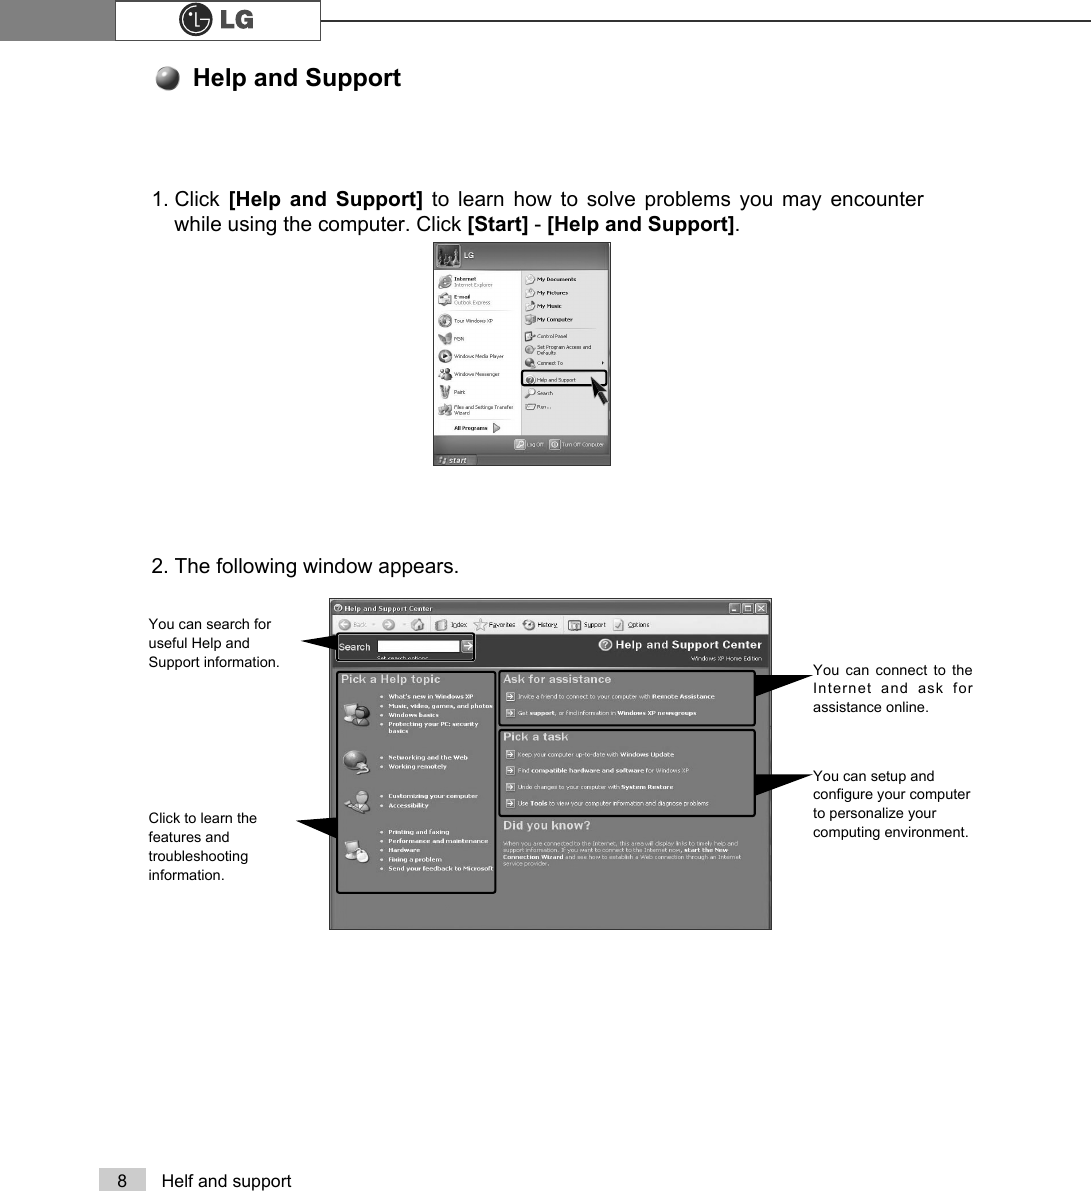 8 Helf and support1. Click  [Help and Support] to learn how to solve problems you may encounterwhile using the computer. Click [Start] - [Help and Support].2. The following window appears.Help and SupportYou can search foruseful Help andSupport information.Click to learn thefeatures andtroubleshootinginformation.You can connect to theInternet and ask forassistance online.You can setup andconfigure your computerto personalize yourcomputing environment.